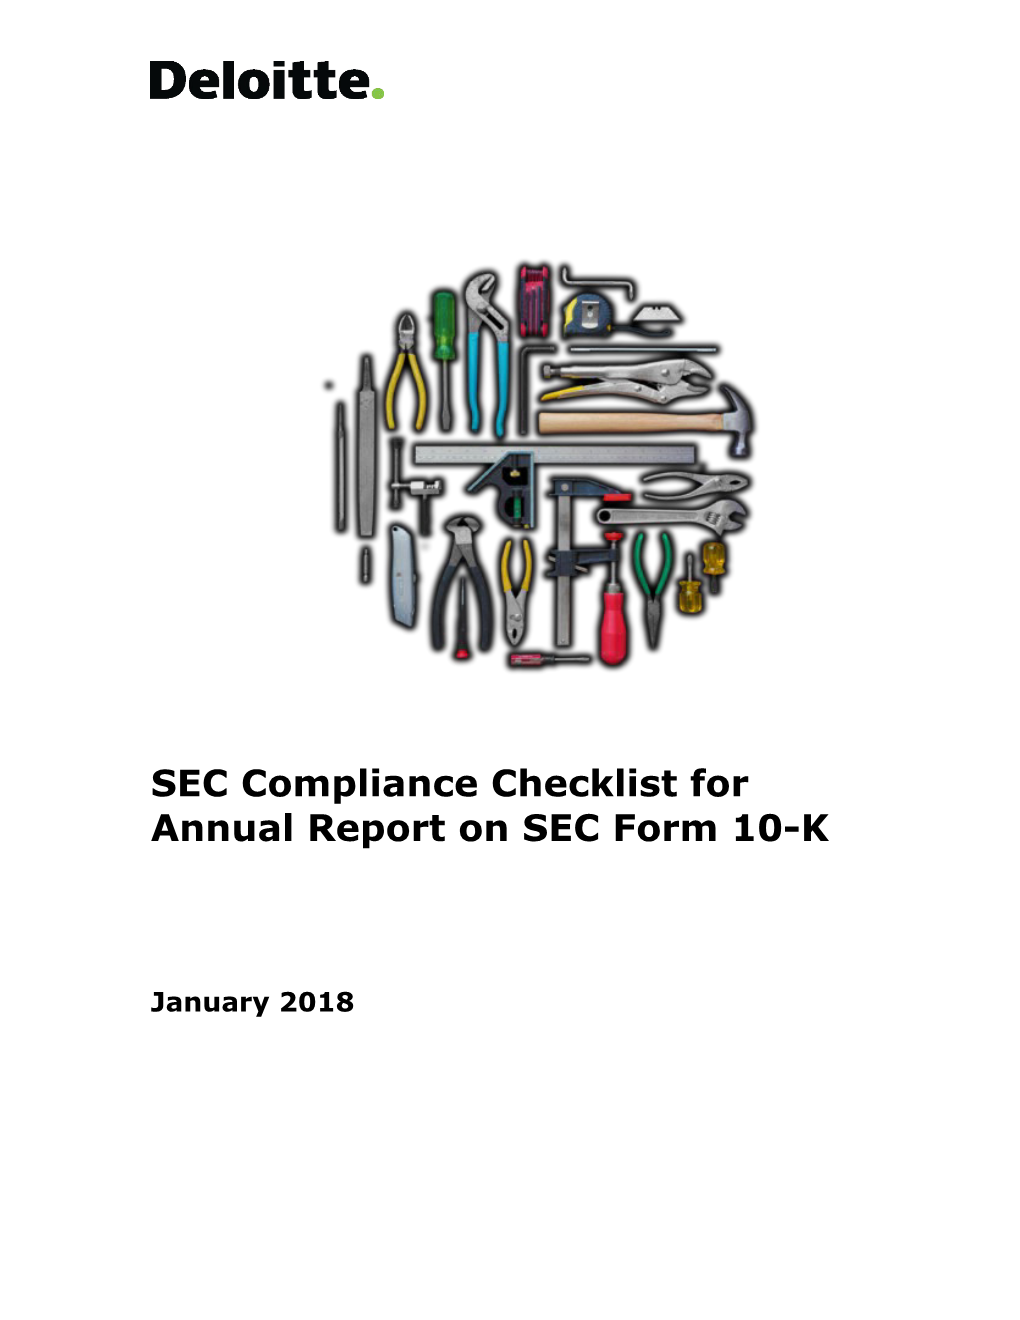 Checklist for Annual Report on Sec Form 10-K